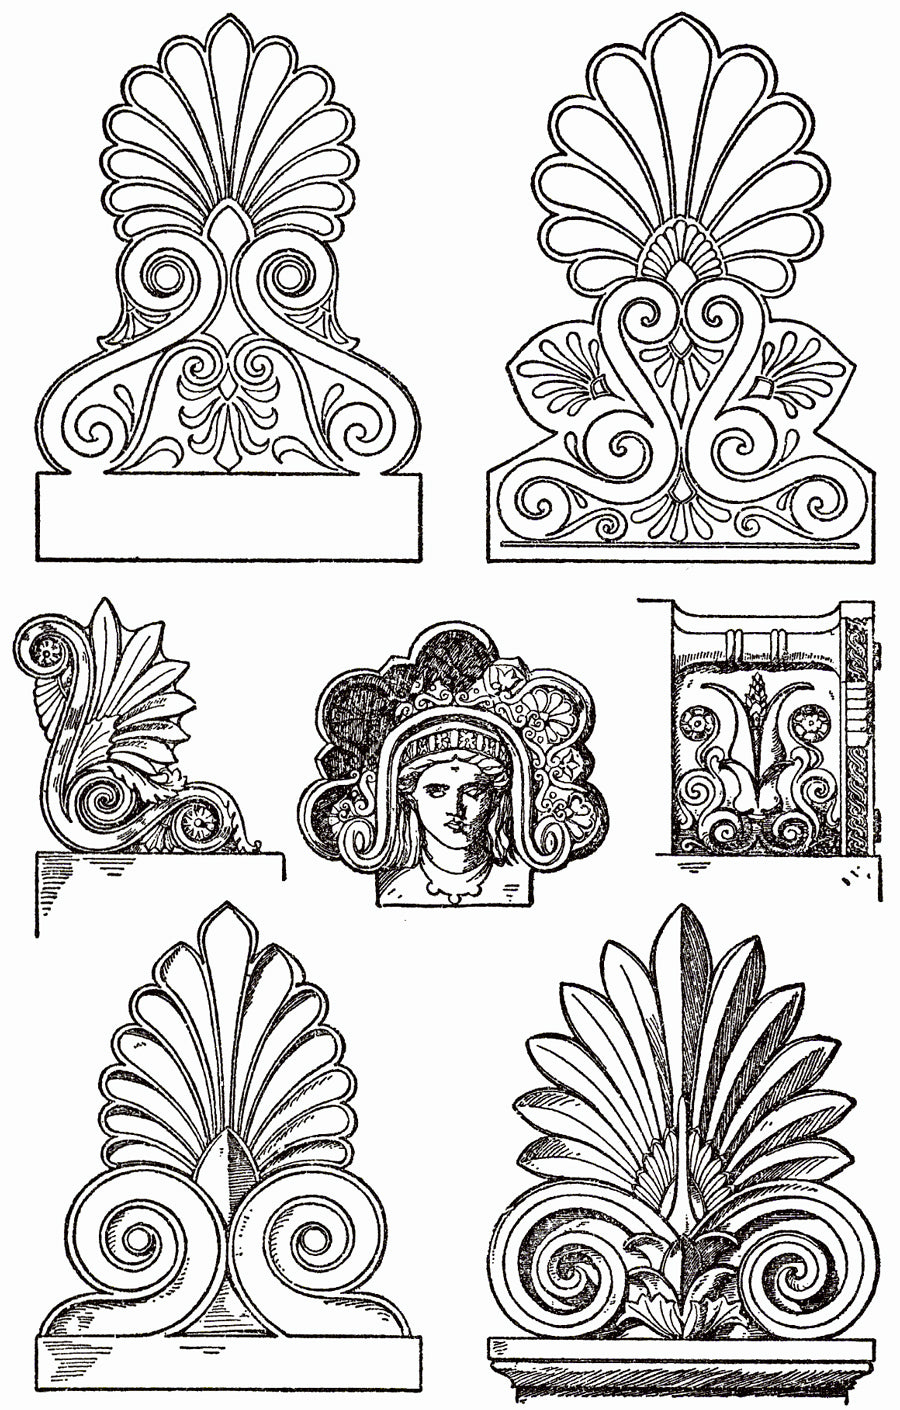 Classical Example & Definition of a Palmette Motif by Brockwell Incorporated